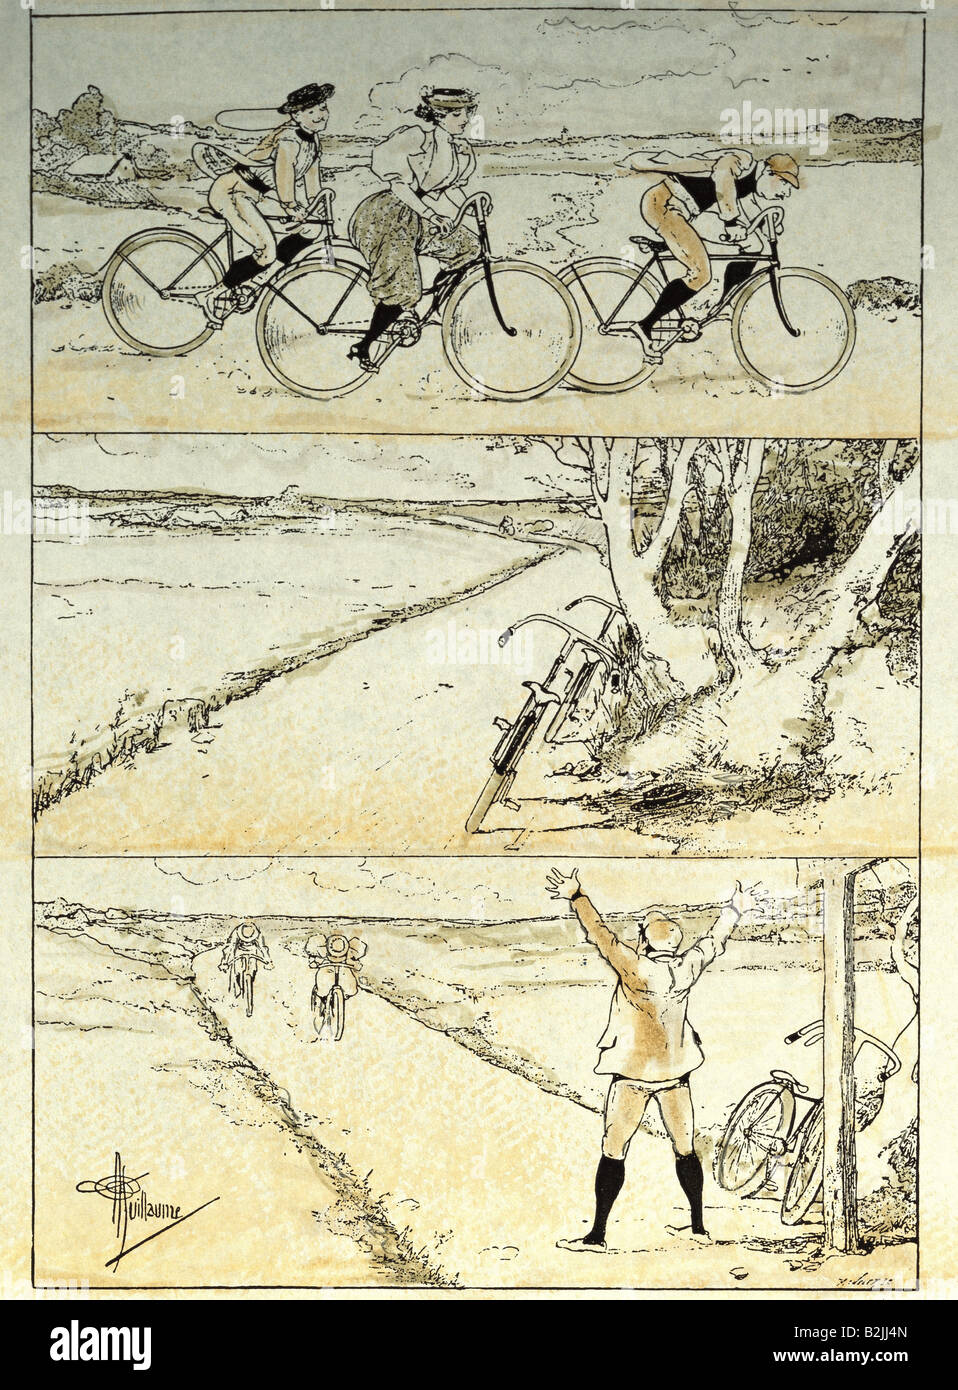 sport, cycling, 'The Race, or the Looser wins', caricatures, lithograph, by Albert Guillaume, from 'Journal pour tous', 1910, private collection, Stock Photo